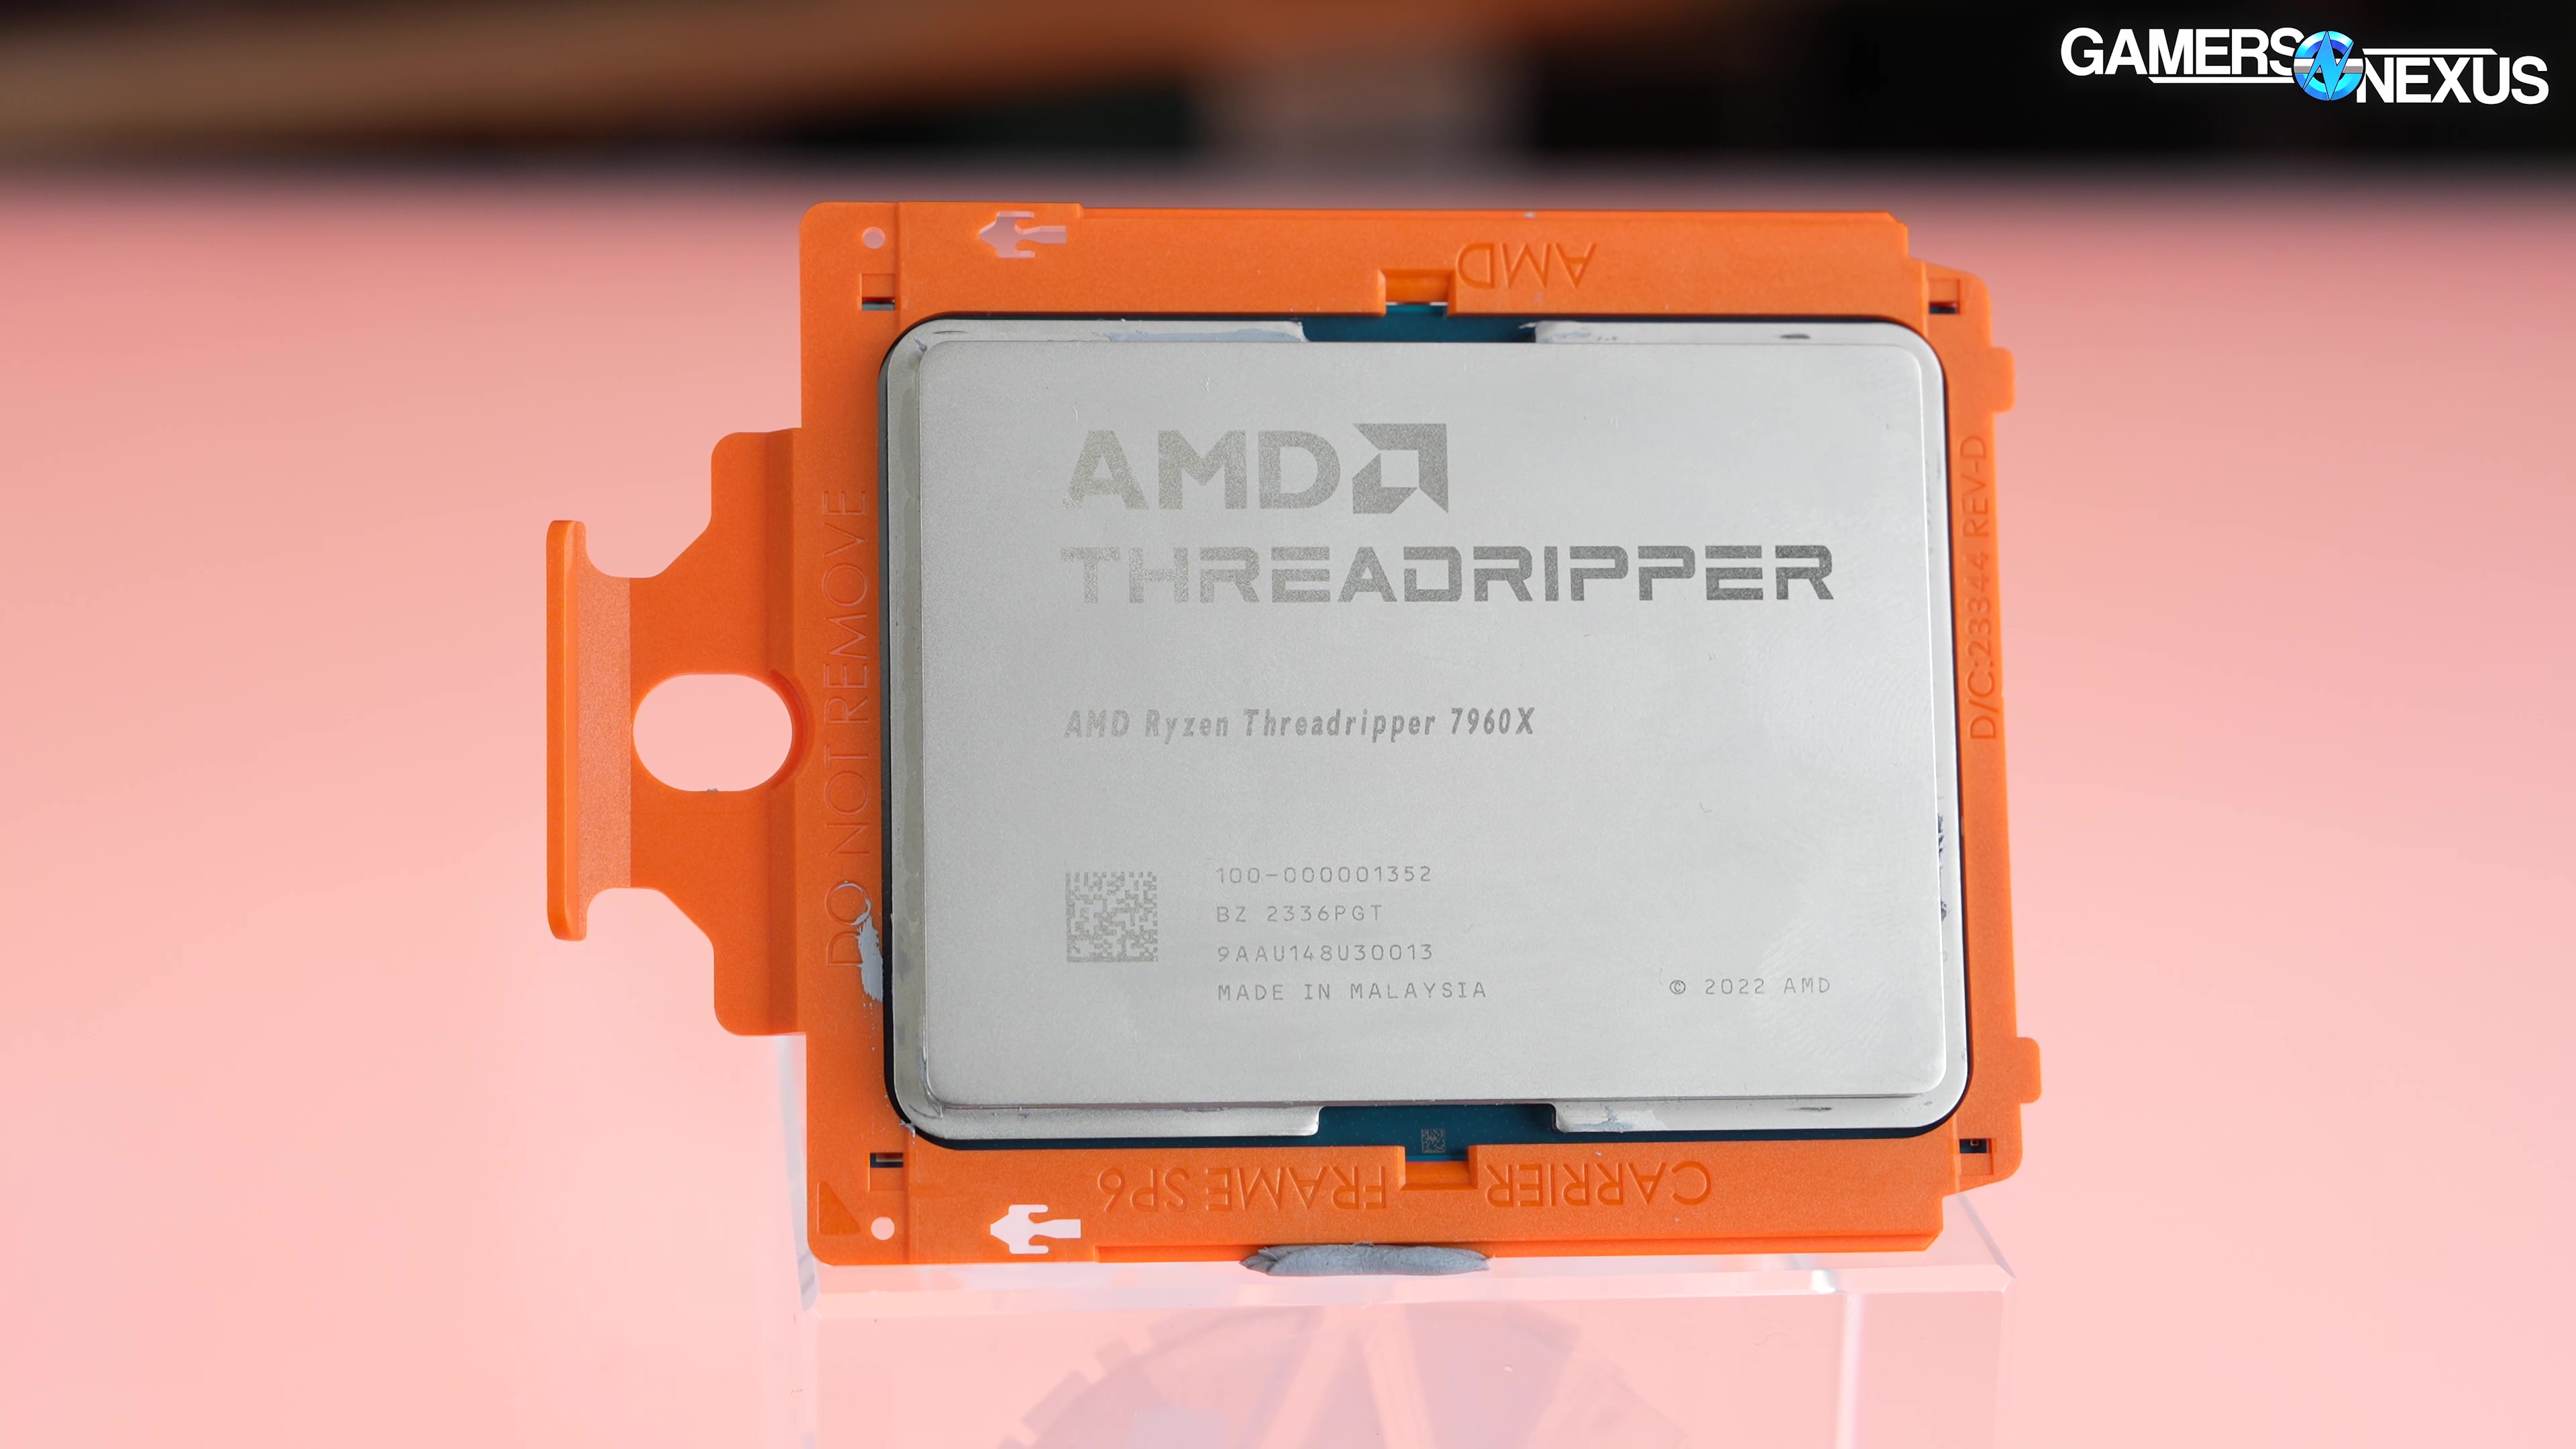 Intel squares up to AMD's Threadripper with 18-core i9 Extreme Edition  processor